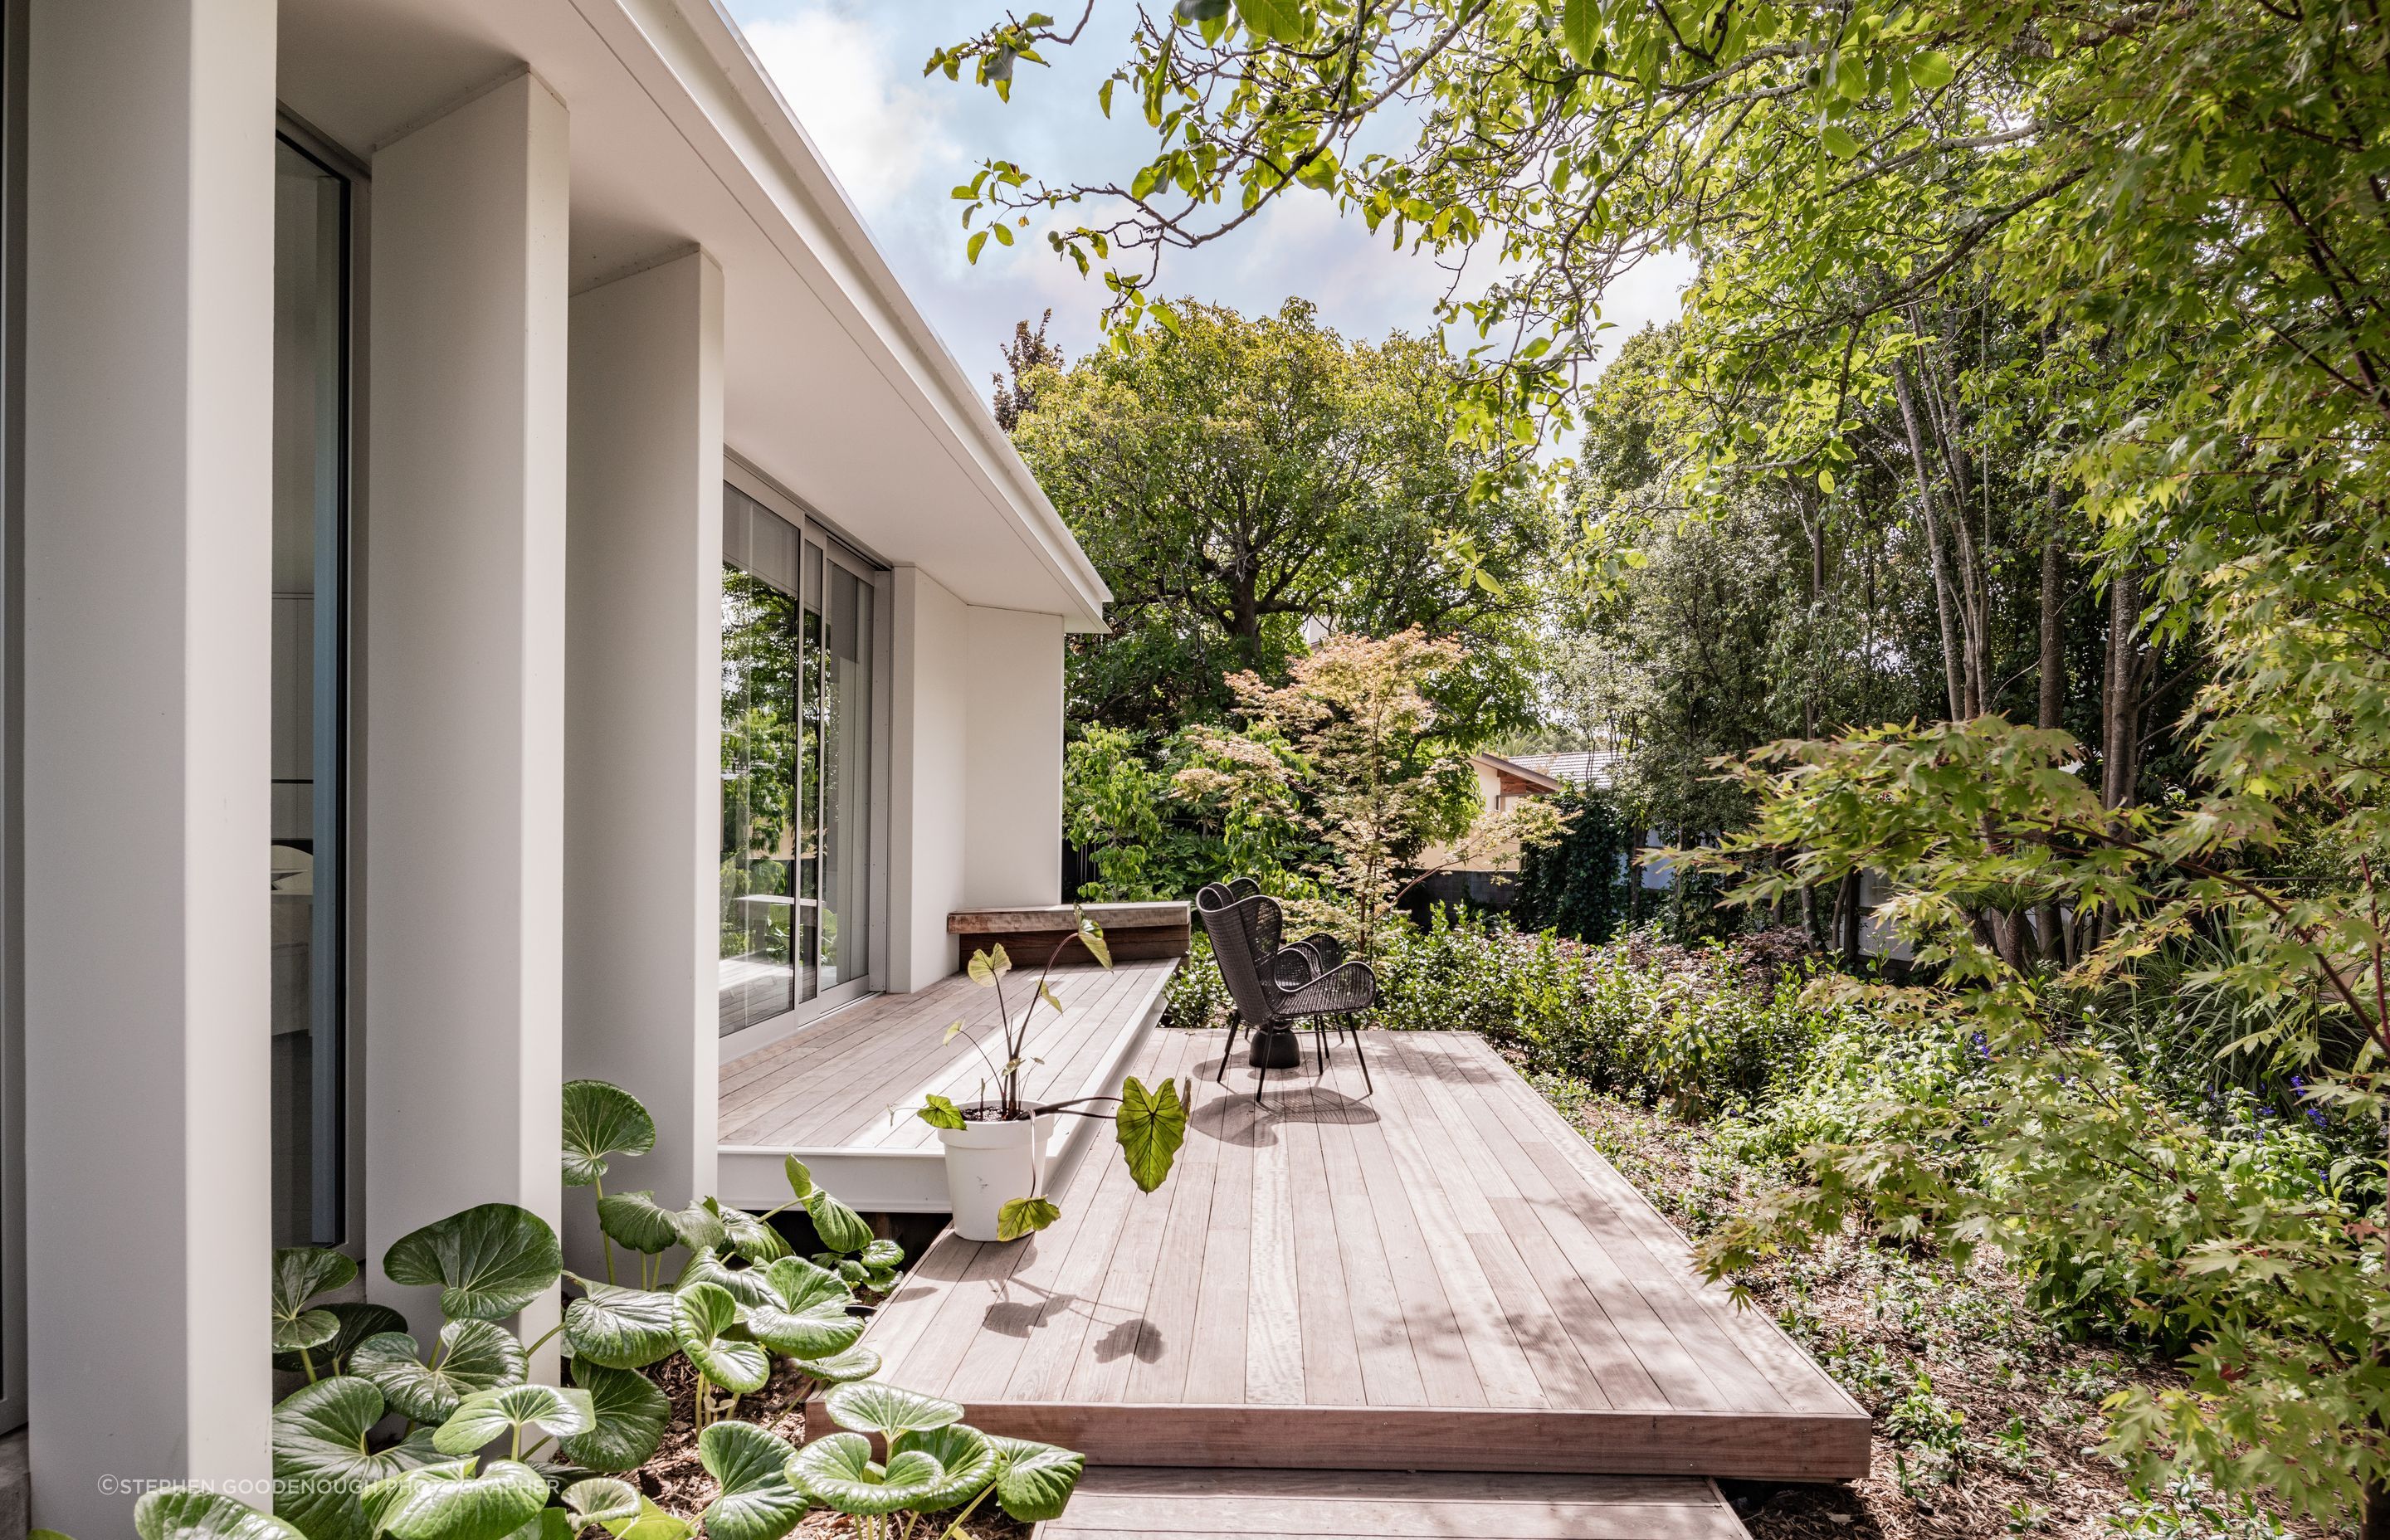 A deck at the back of the home provides another outdoor space to enjoy the surrounding environment.